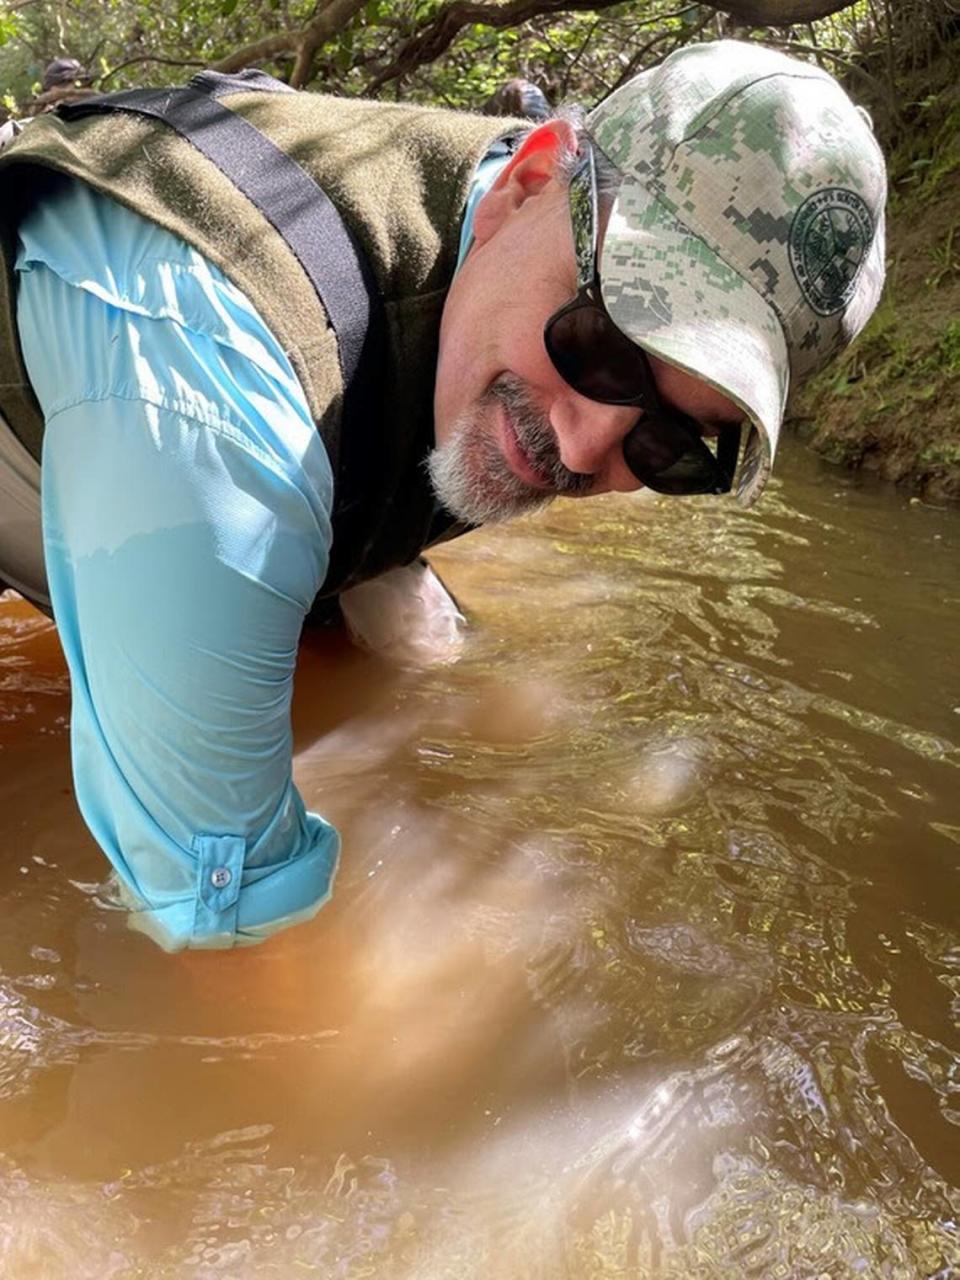 South Carolina Department of Natural Resources director Robert Boyles, Jr. places a Carolina Heelsplitter mussel into Flat Creek in Lancaster County.